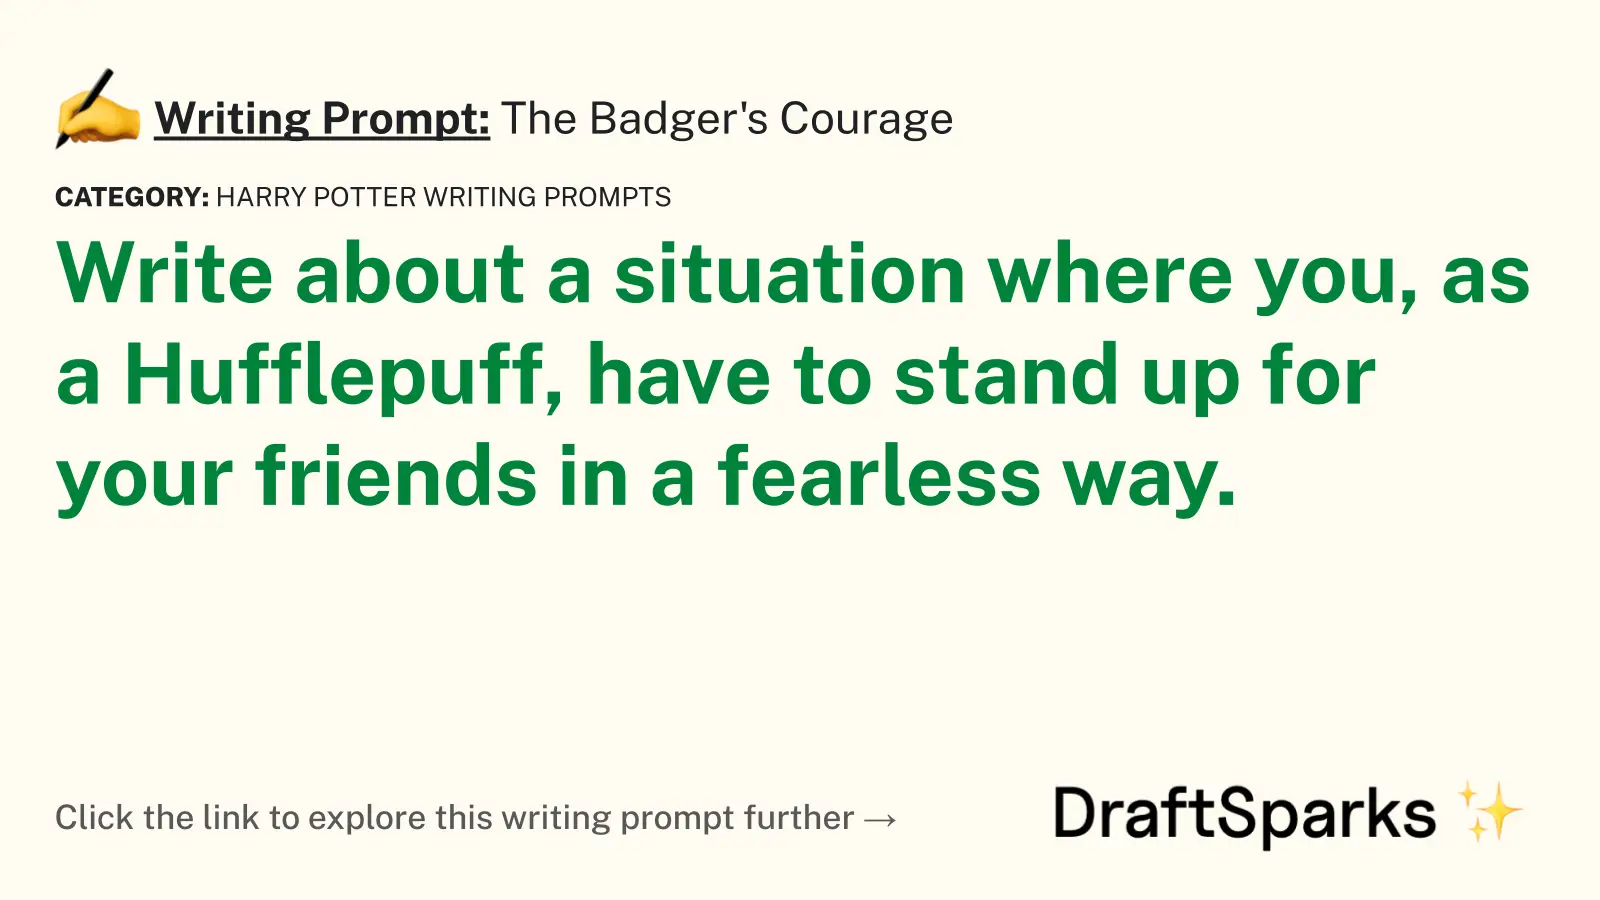 The Badger’s Courage